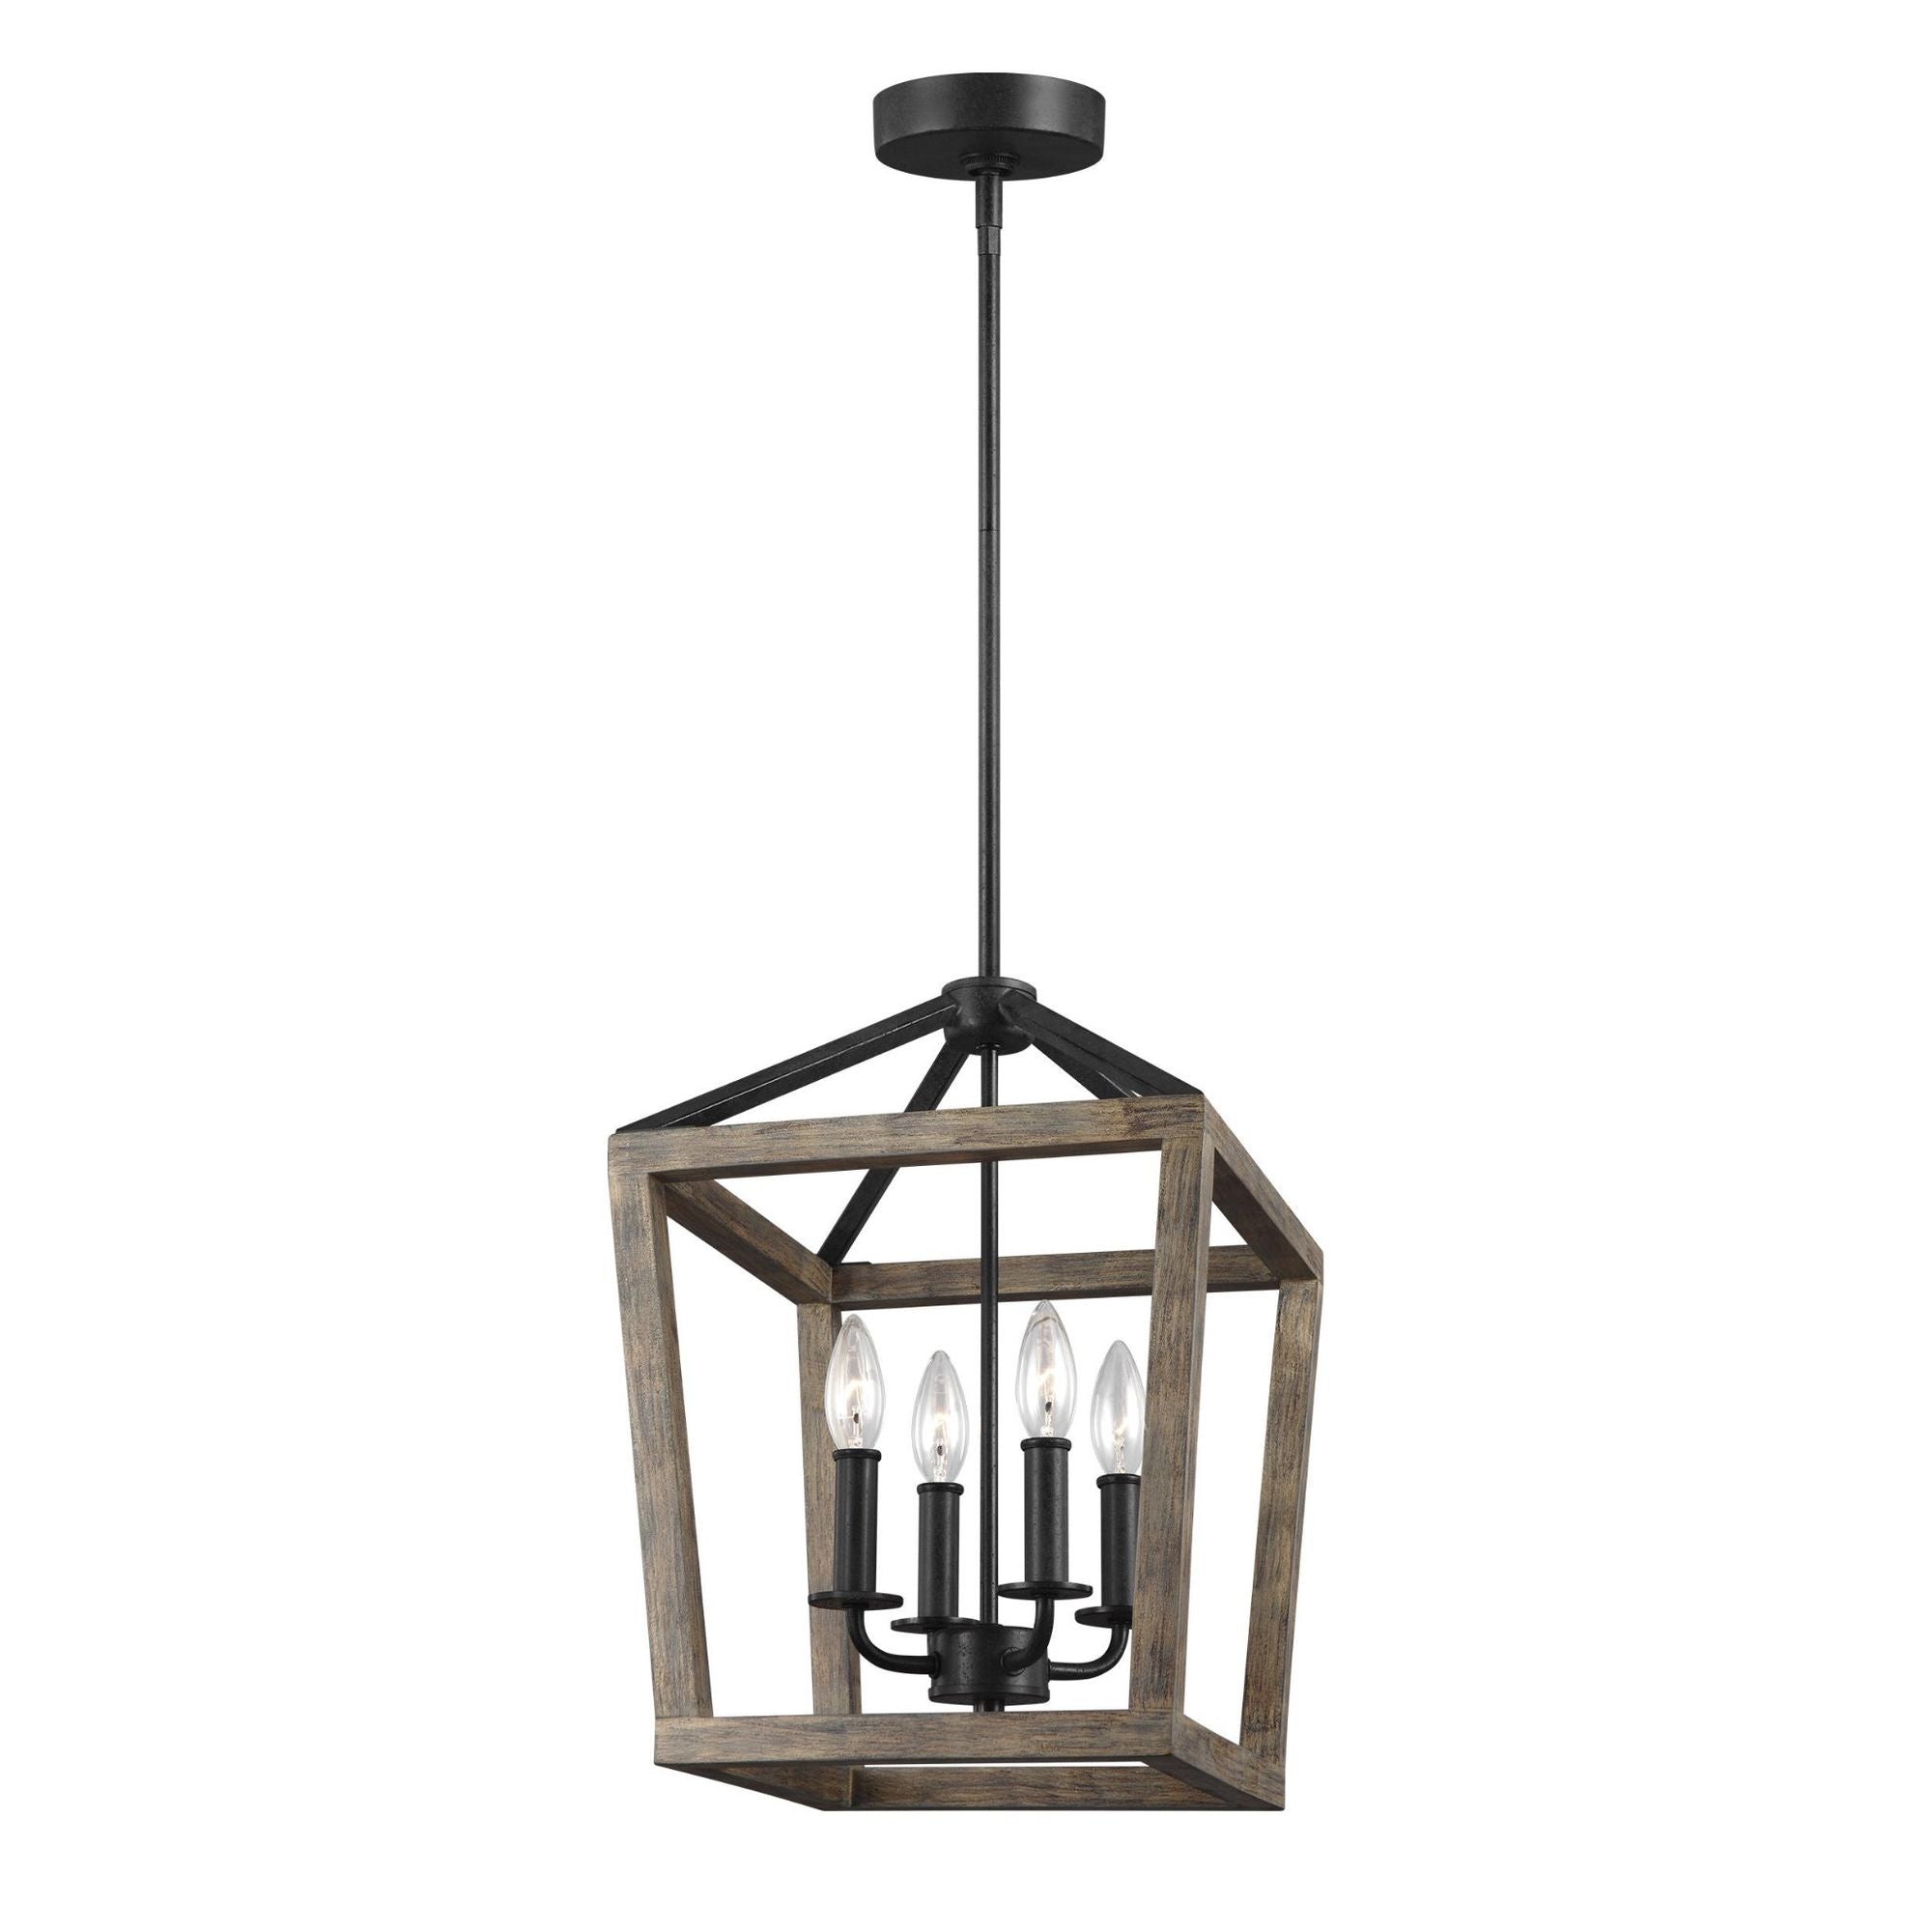 Sean Lavin Gannet Small Chandelier in Weathered Oak Wood / Antique Forged Iron